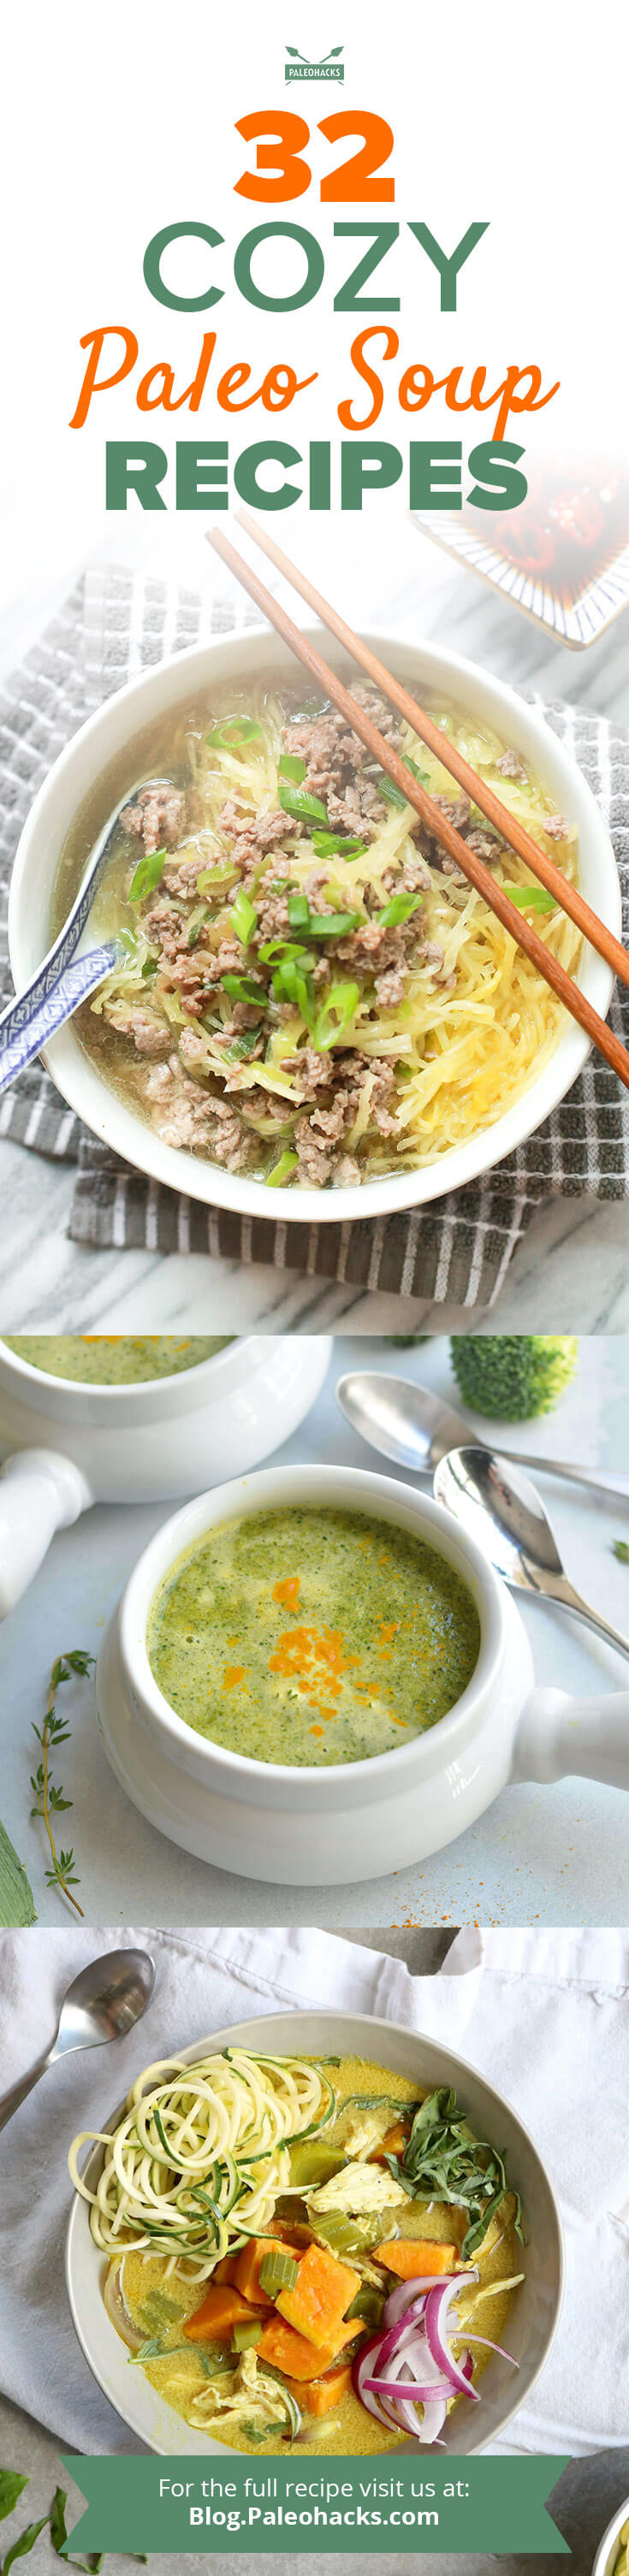 Paleo soup recipes you can stand by, these 32 heartwarming bowls of goodness are sure to nourish your soul and appetite in the best possible way!